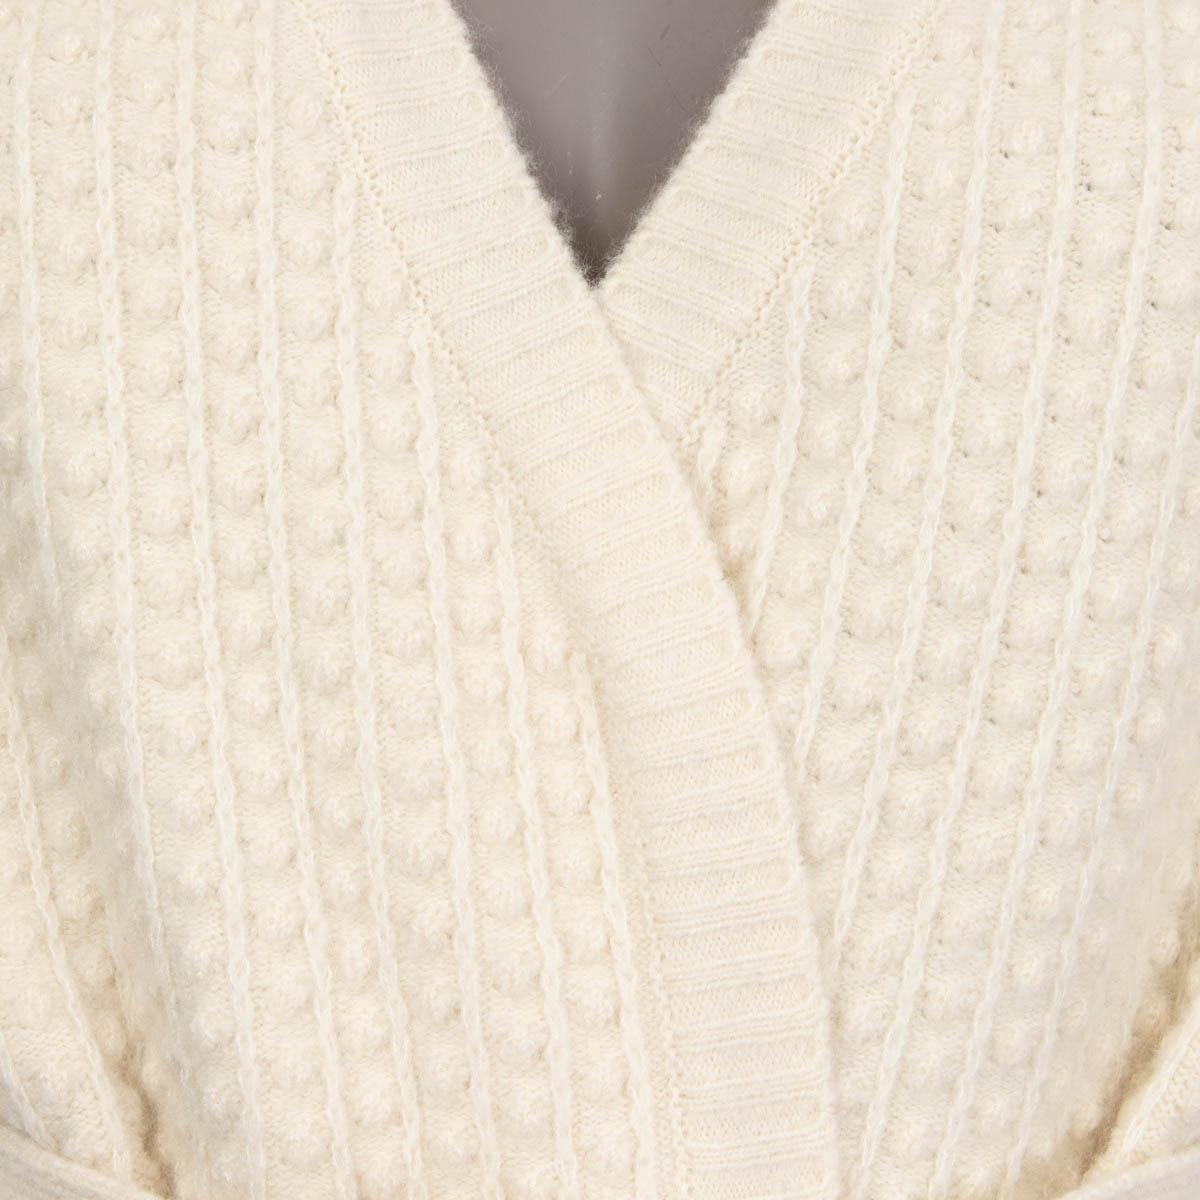 CHANEL ivory cashmere 2018 BELTED SLEEVELESS Knit Cardigan Sweater 40 M For Sale 1